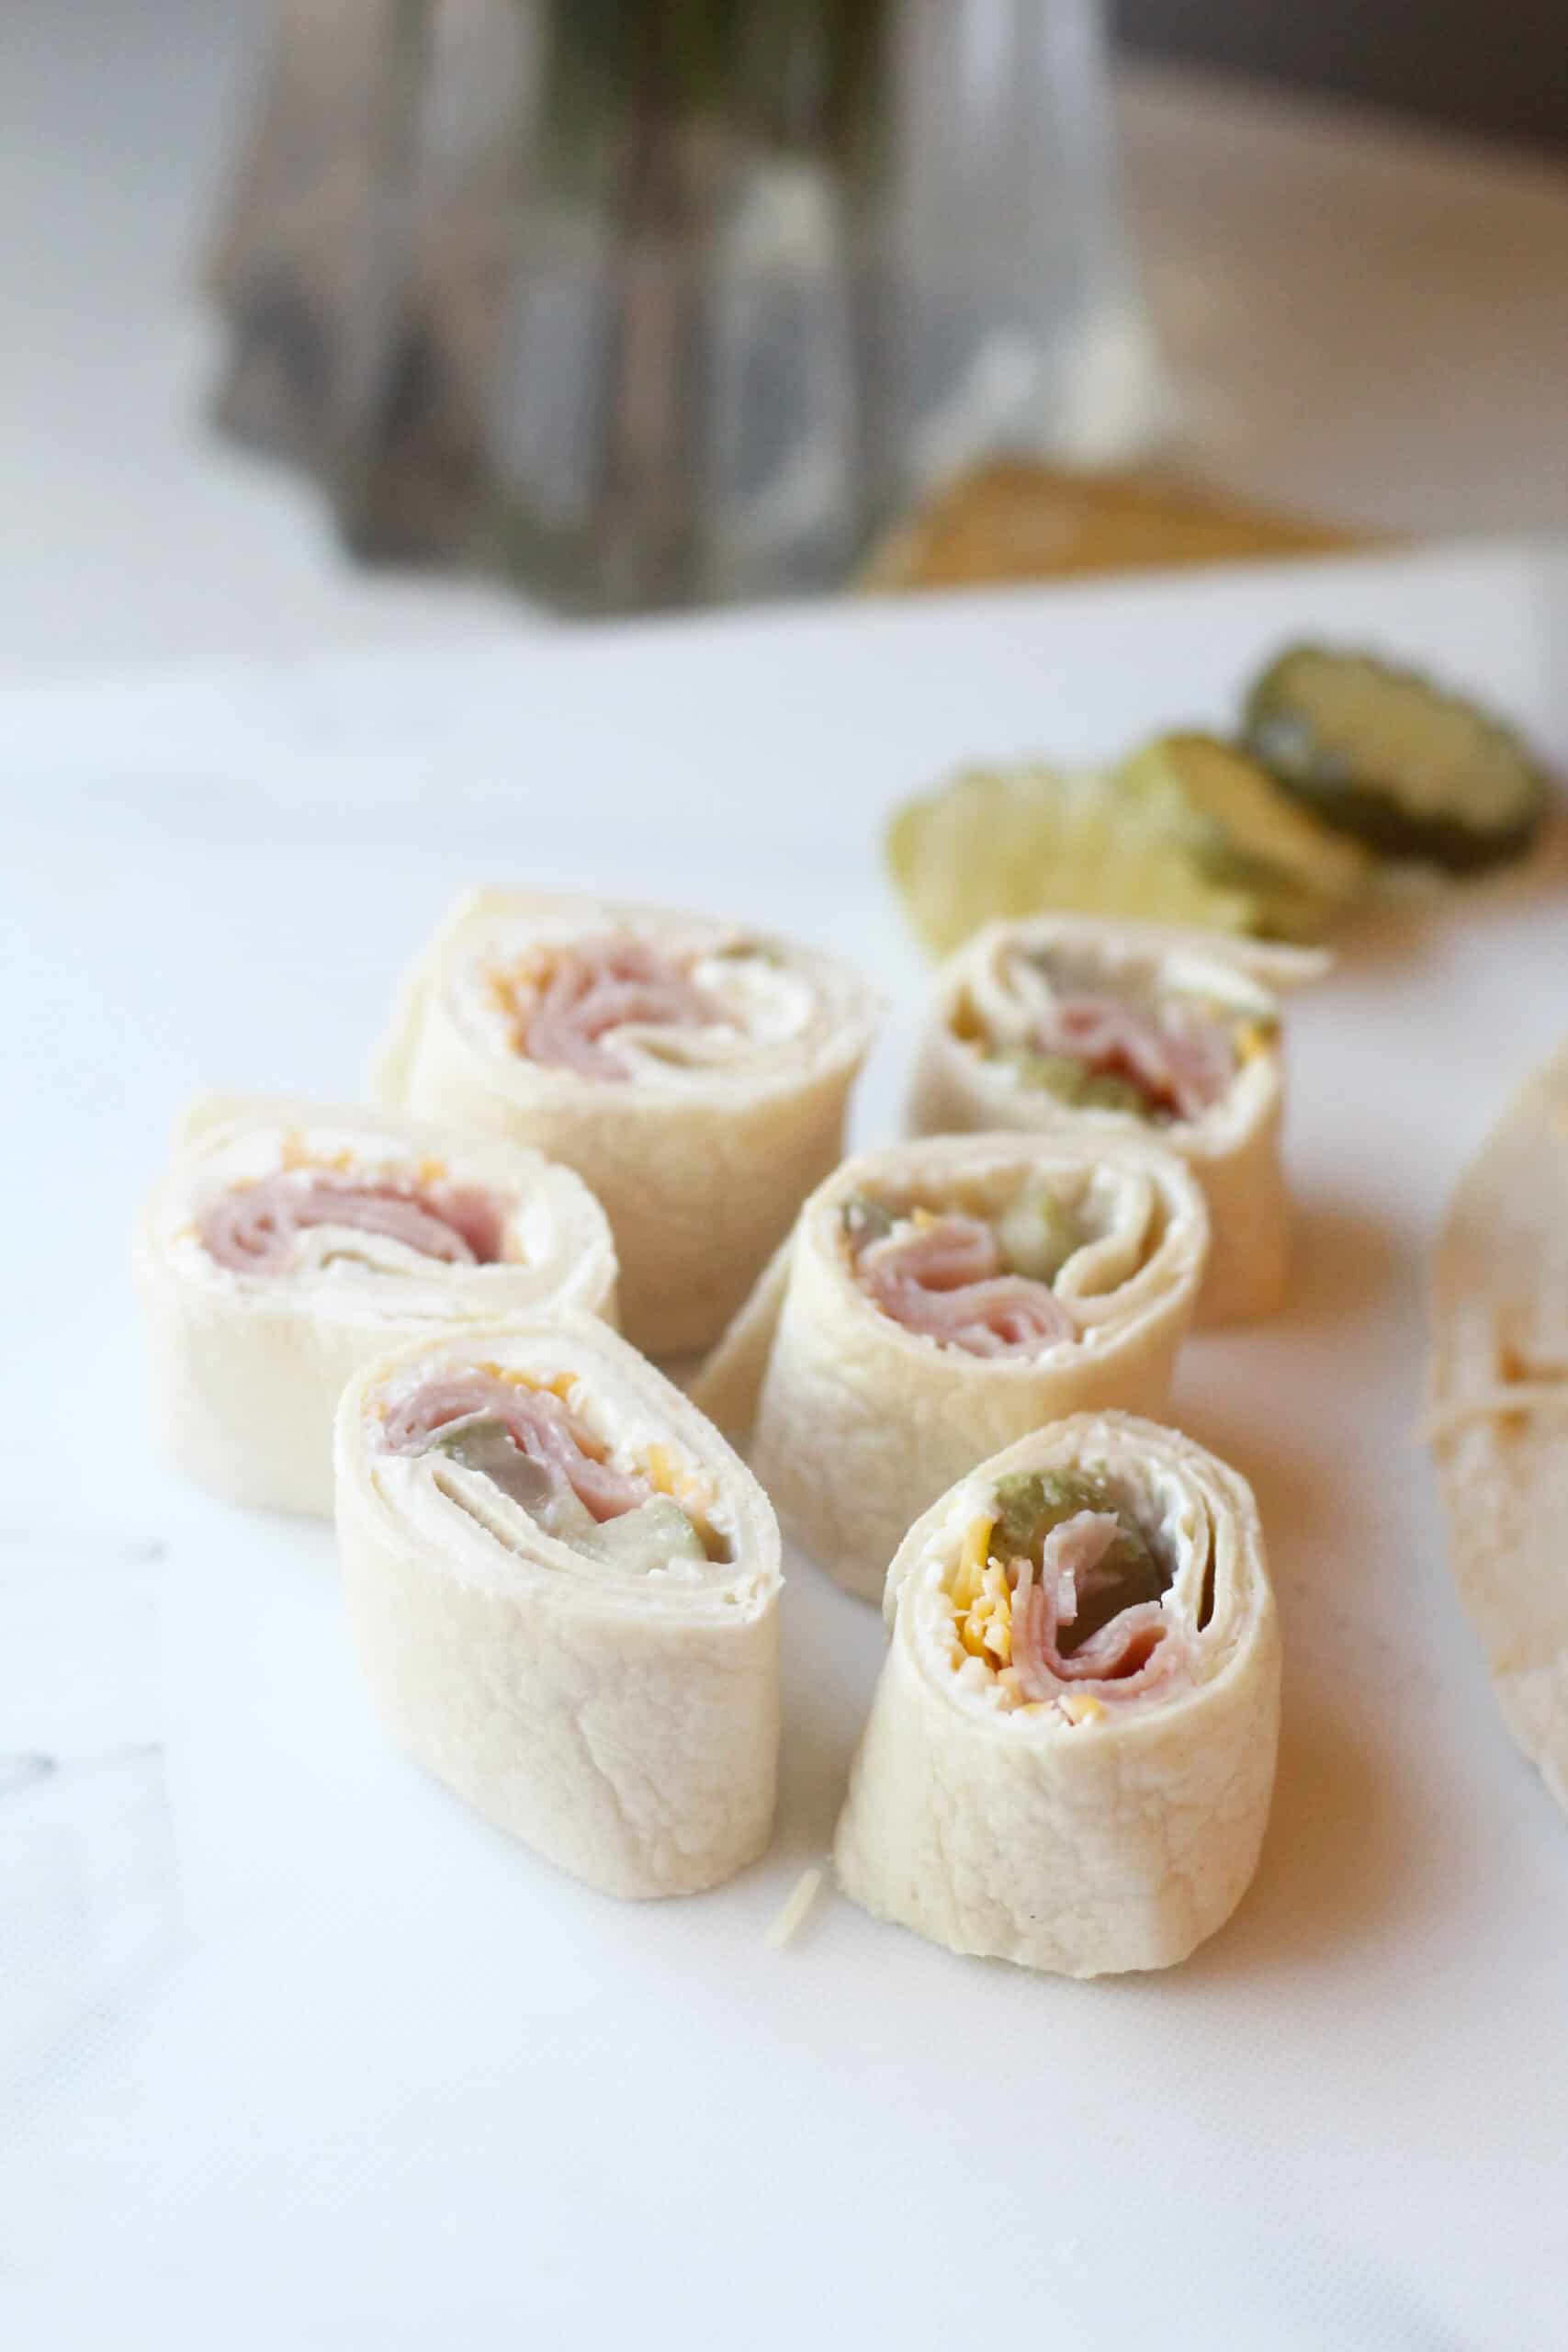 pickle roll ups